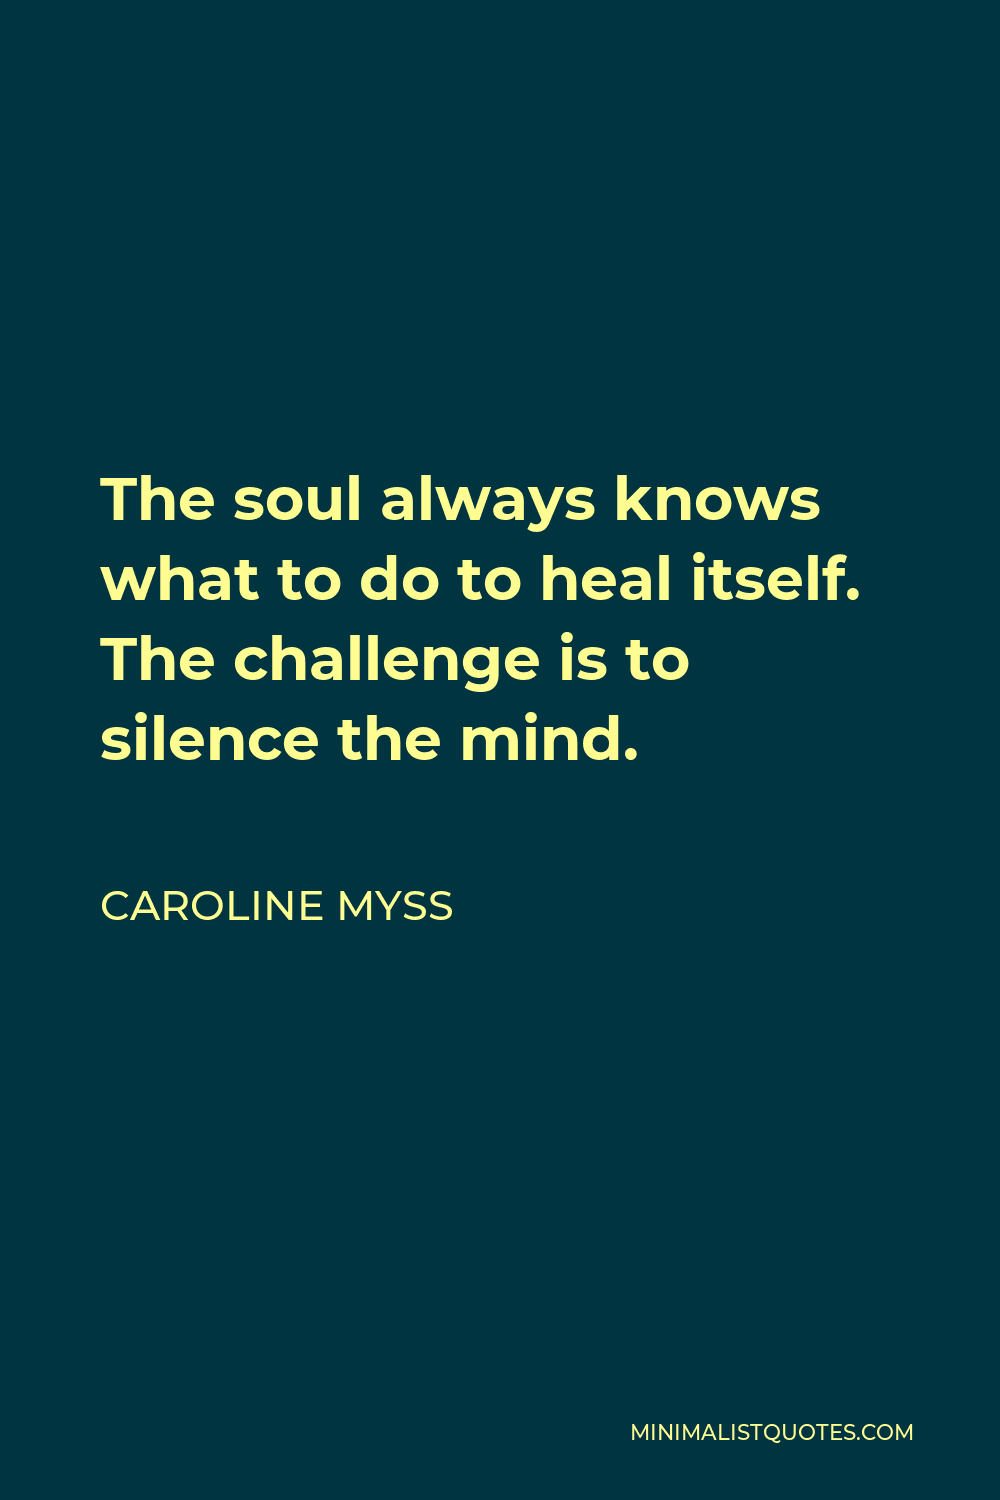 Caroline Myss Quote - The soul always knows what to do to heal itself. The challenge is to silence the mind.